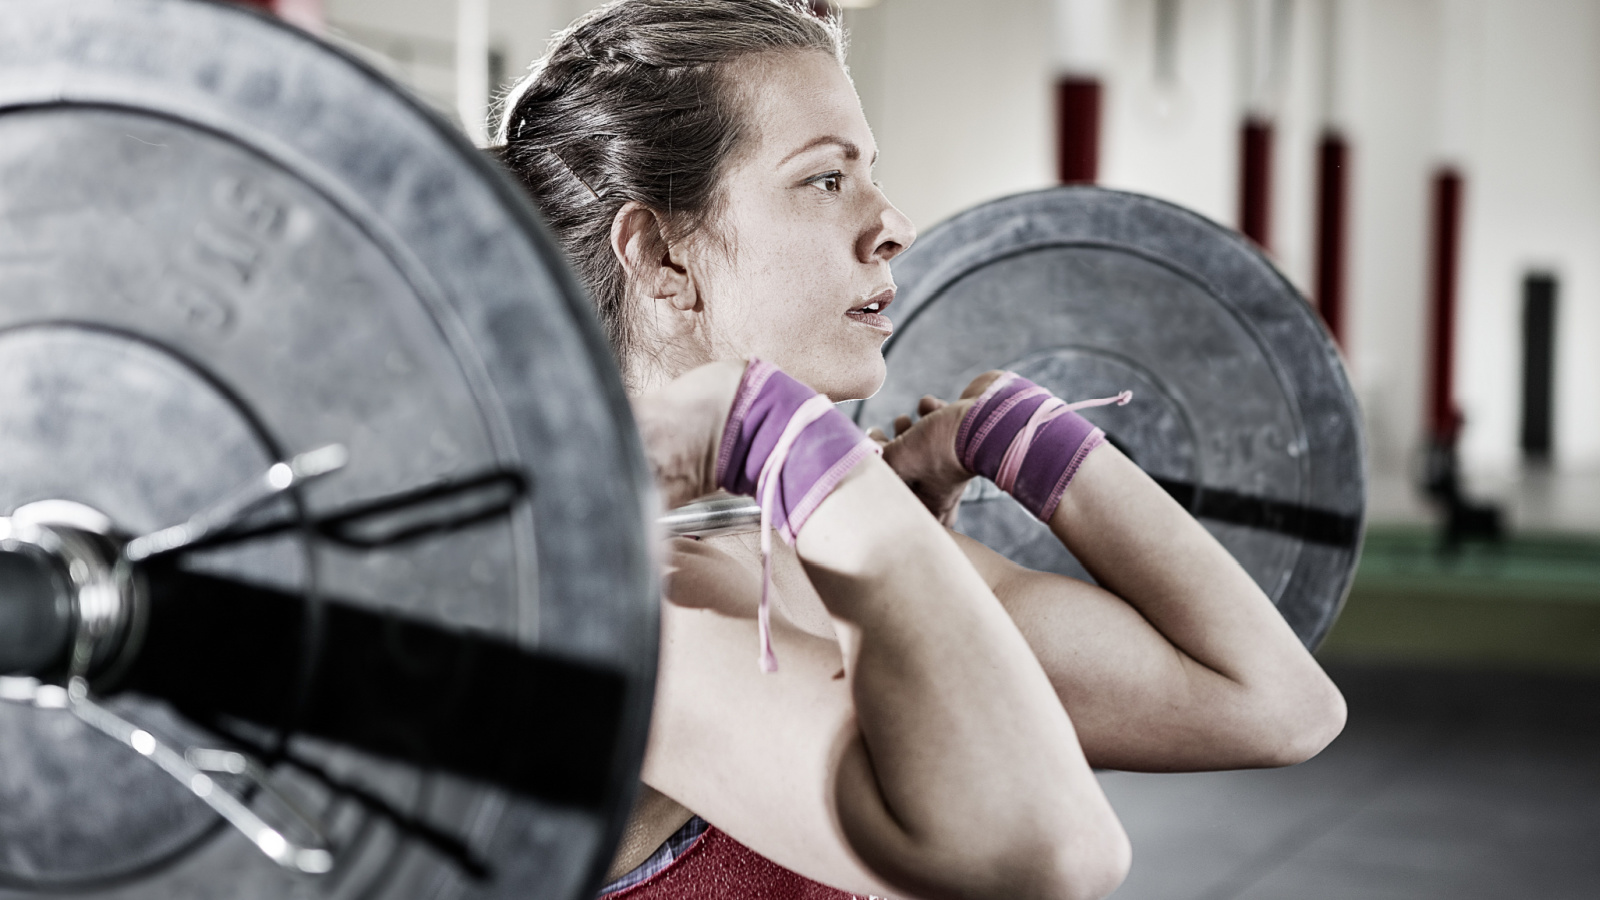 7 Tips to Perfect Your Front Squat Form